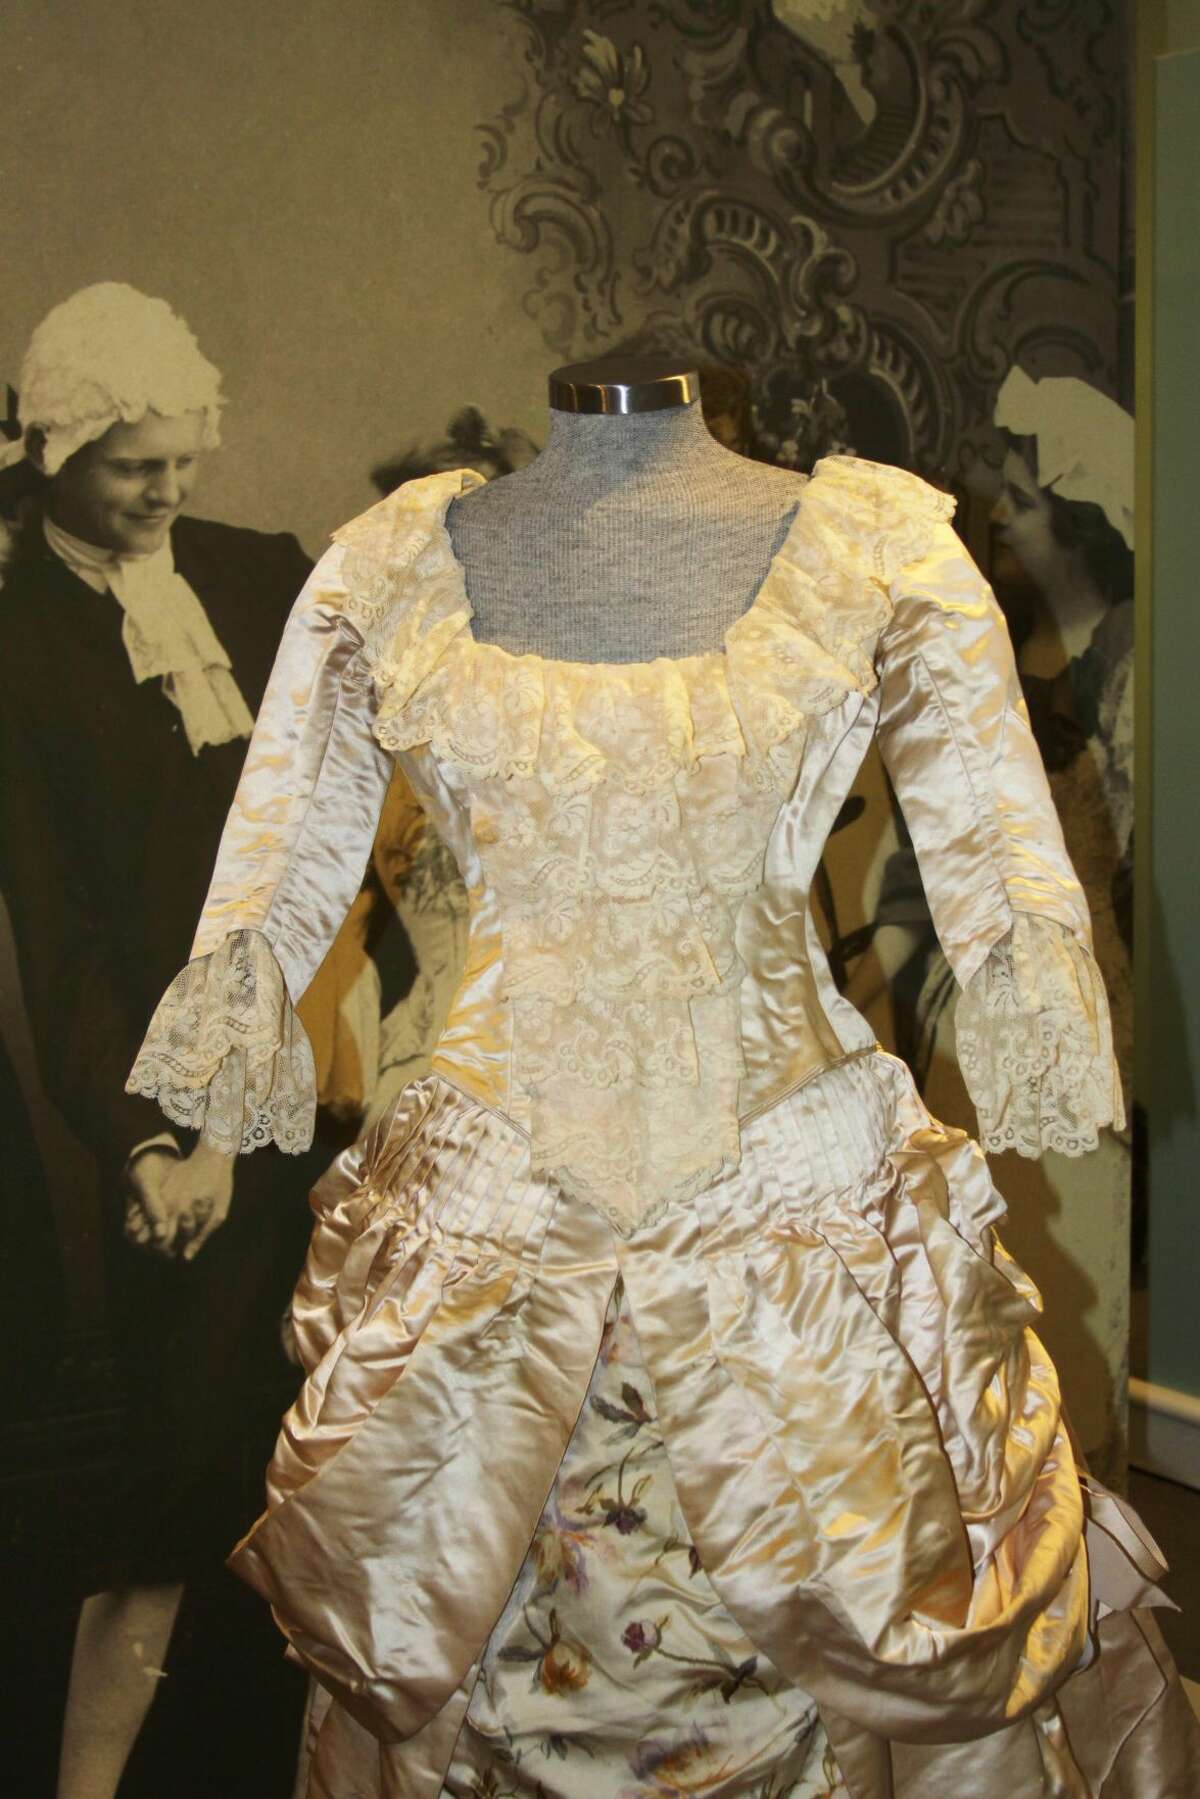 An elaborate gown of the Colonial Revival period in front of a tableau from that period.